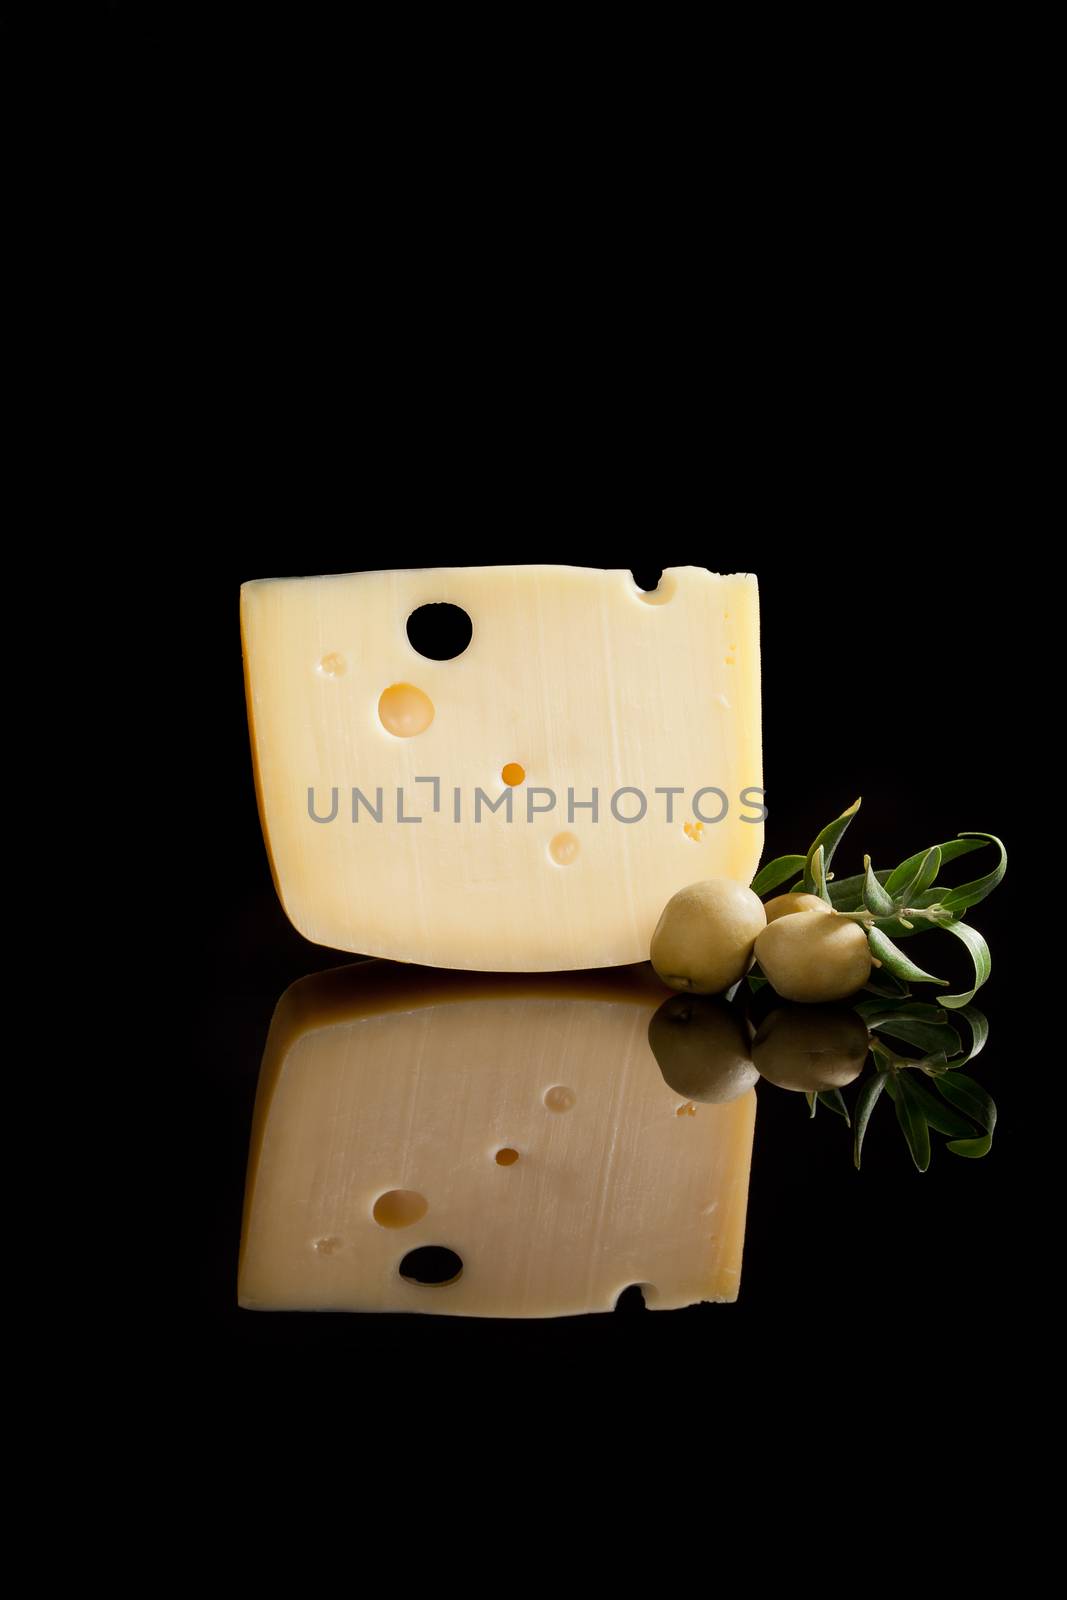 Luxurious cheese background. Swiss cheese, fresh olives and olive branch isolated on black background. Culinary gourmet food.